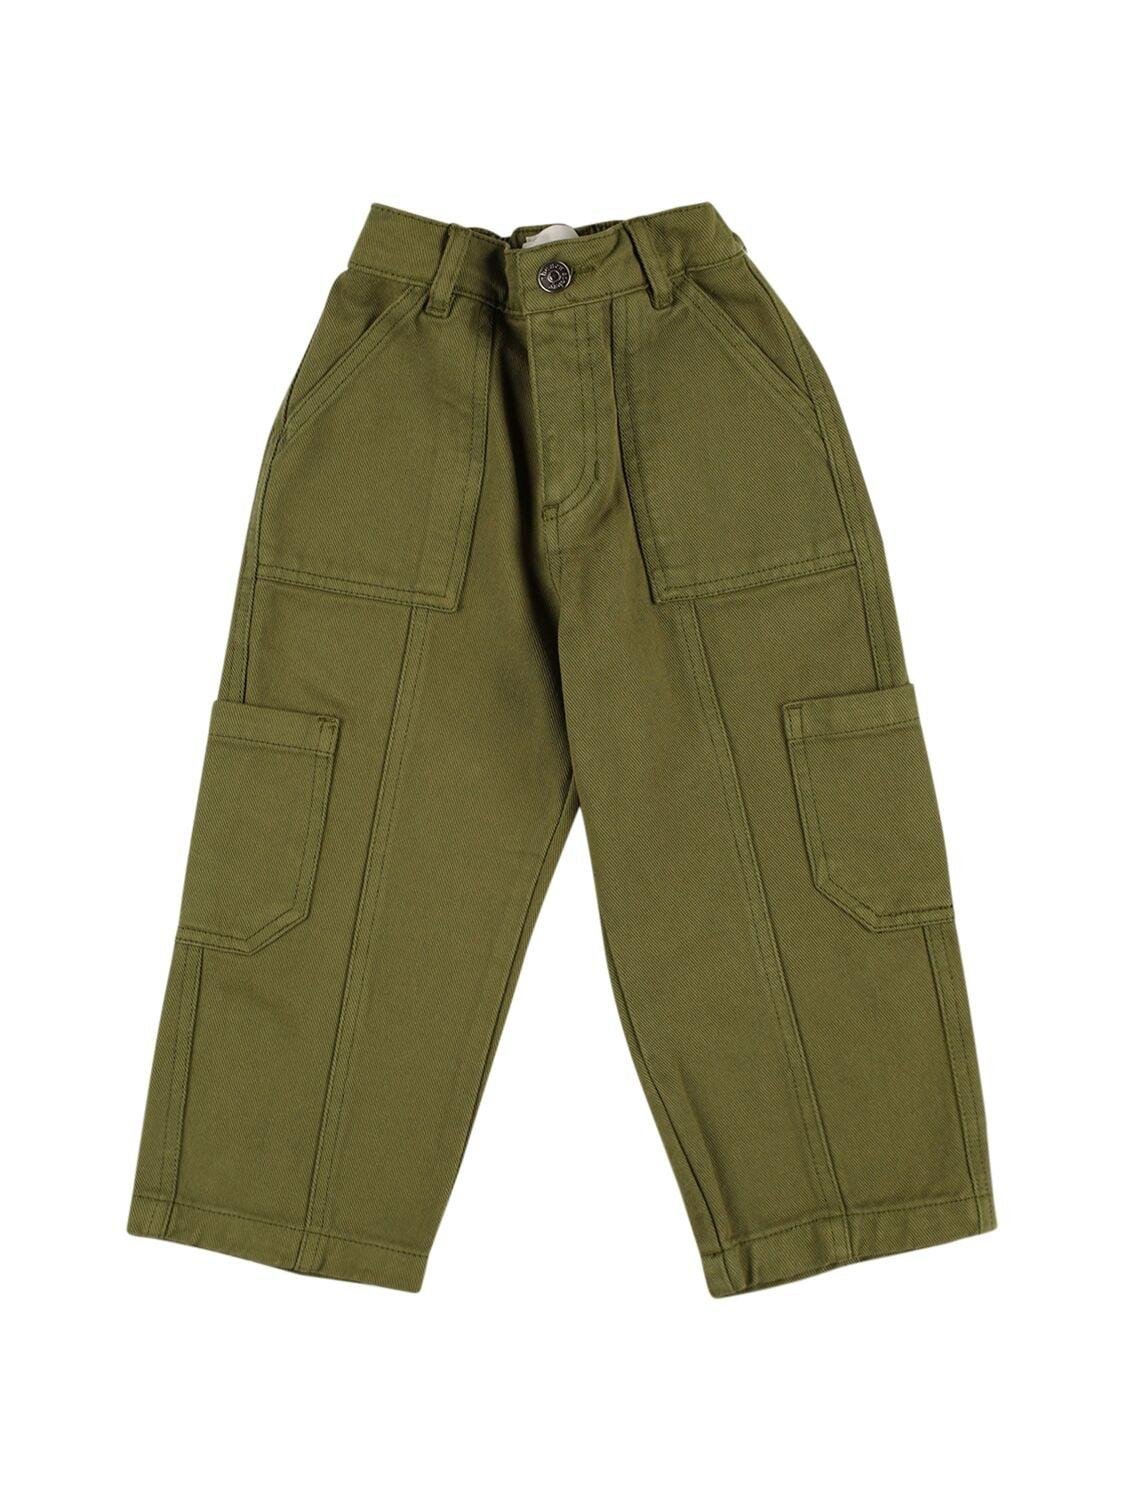 Bci Cotton Cargo Pants by THE NEW SOCIETY